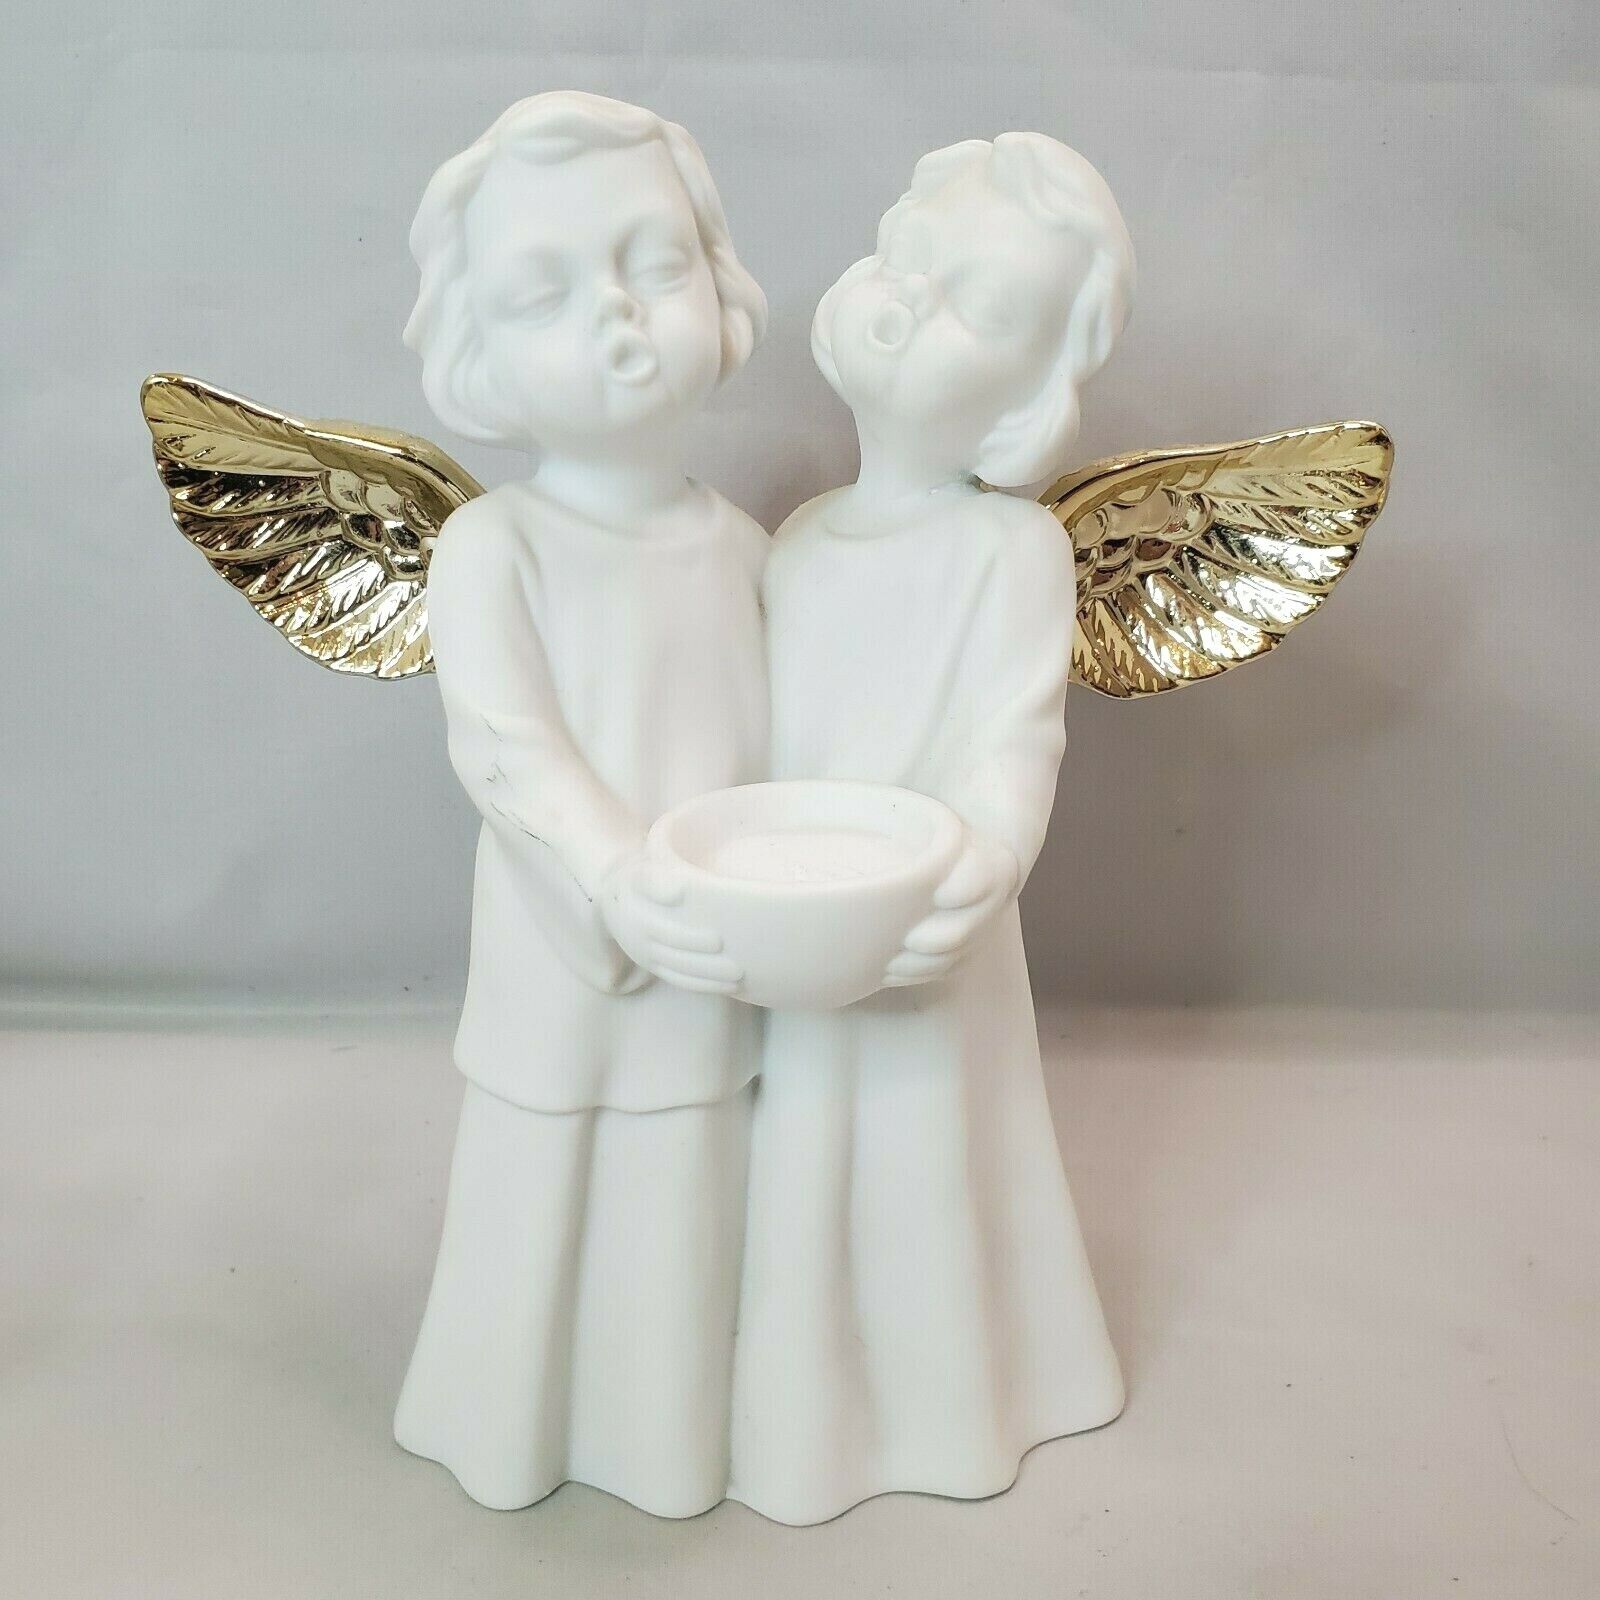 Department Dept 56 Winter Silhouettes Choir Of Angels Votive Candle Holder